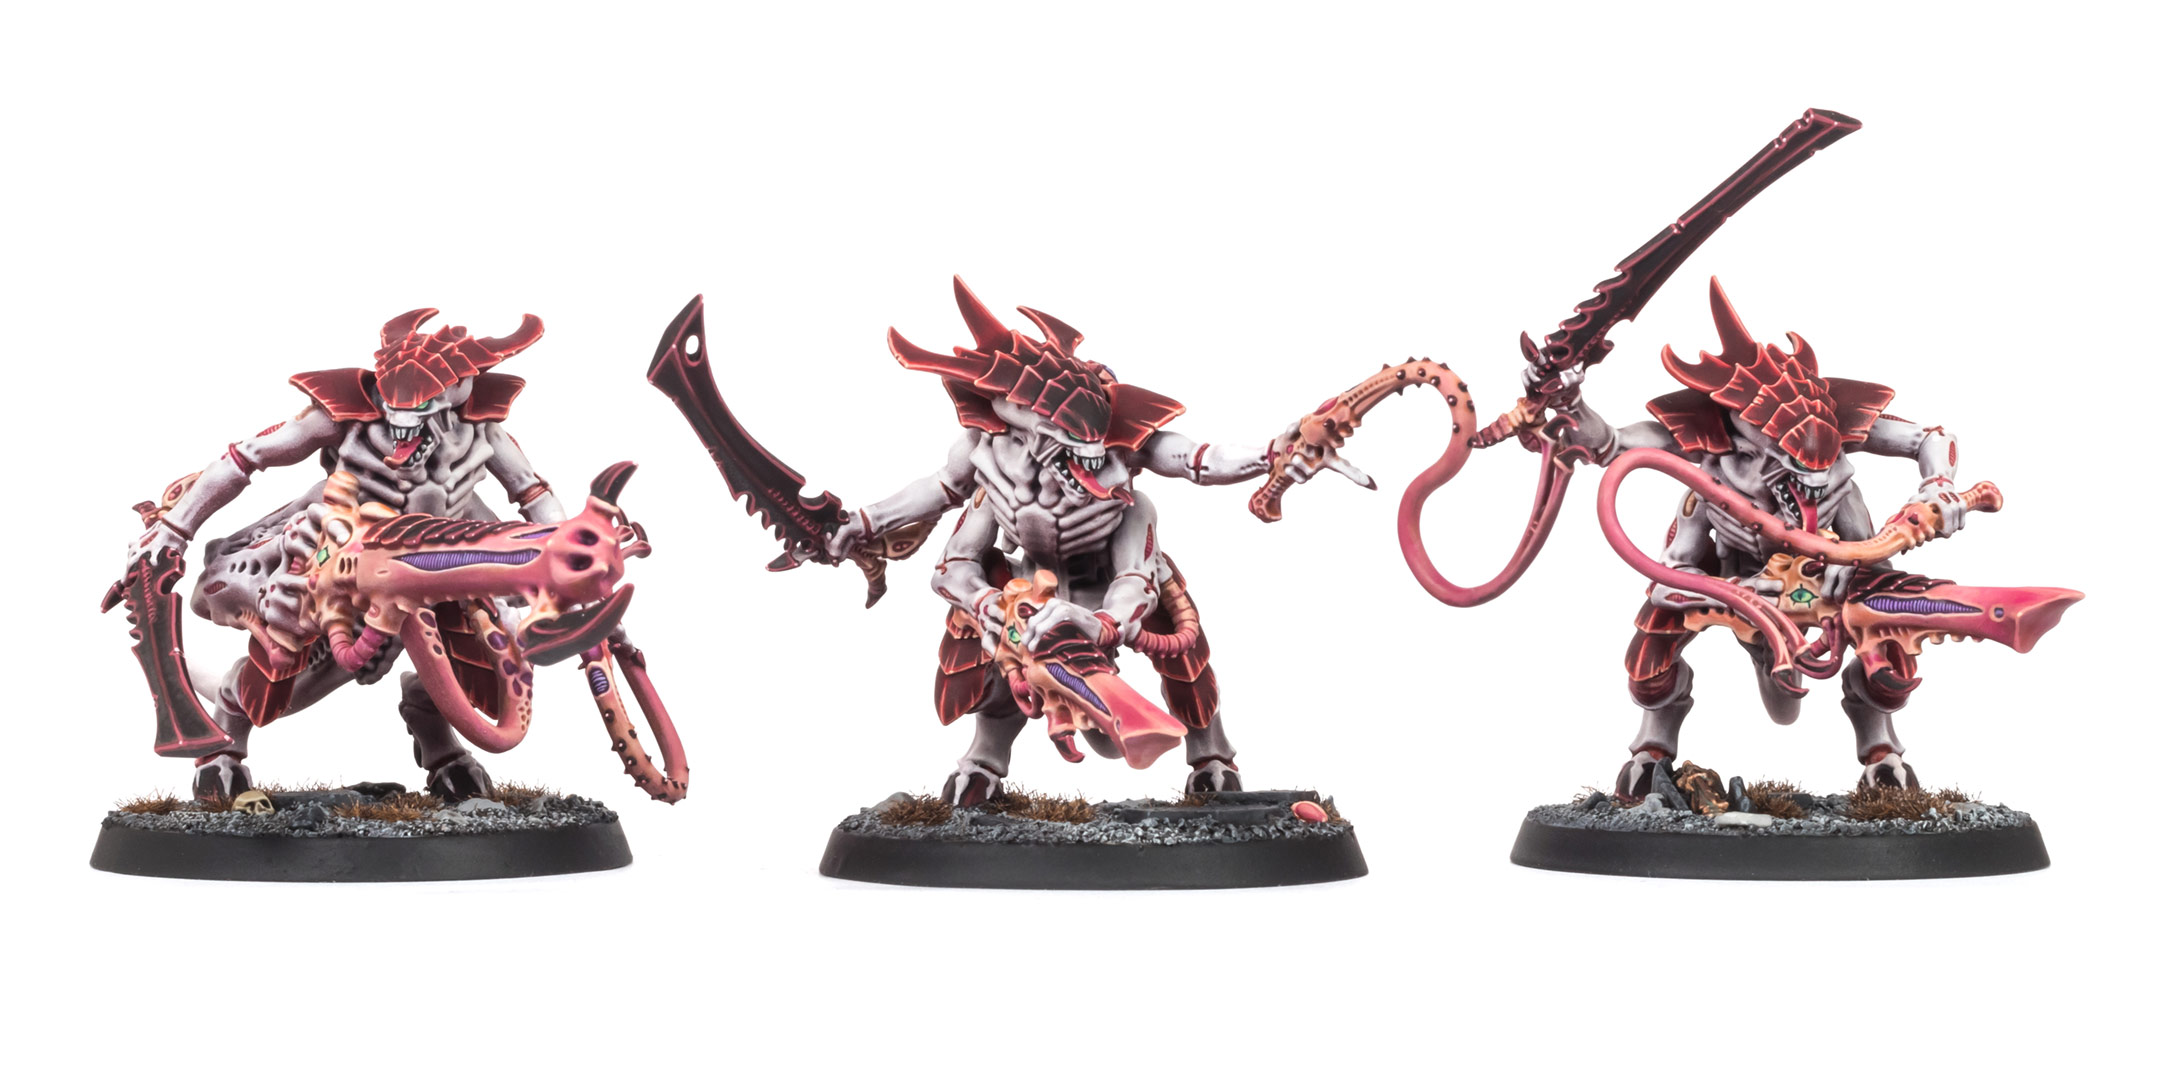 Group of 3 Hive Fleet Kraken Tyranid Warriors on white background, painted by Stahly